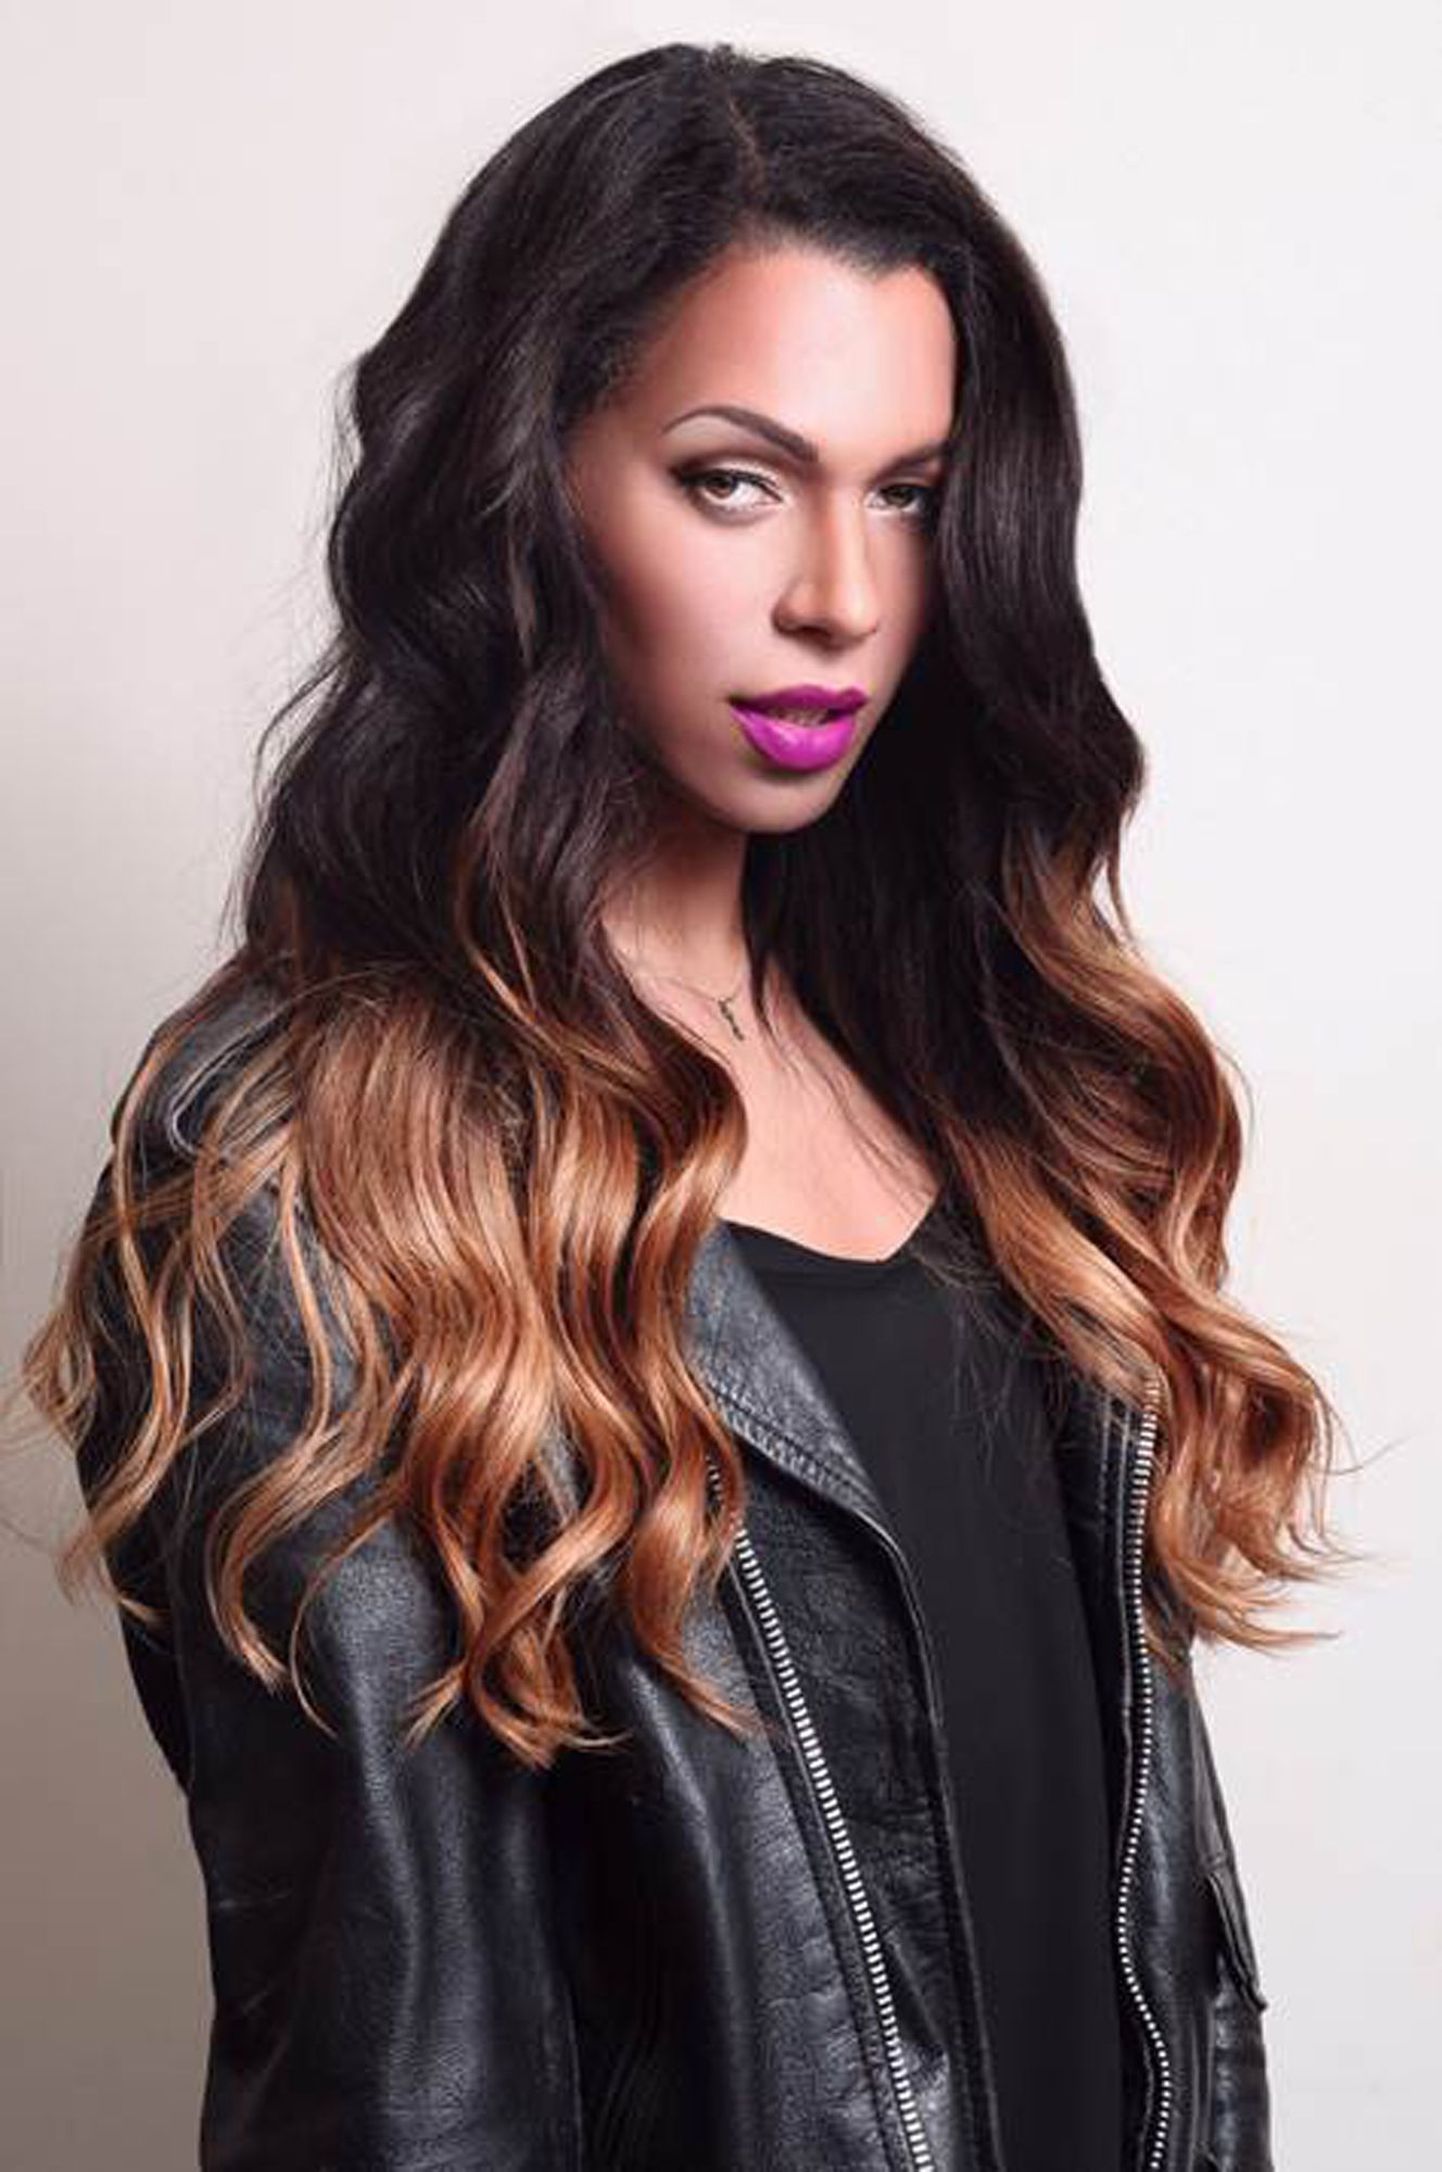 PIC BY LEFTERIS PRIMOS/CATERS - (PICTURED:MUNROE BERGDORF) - Meet Munroe Bergdorf, the super sexy brunette who was actually born a BOY. With her flowing locks and flawless complexion, its hard to believe that this 27-year-old from East London was once a boy named Ian. But transgender Munroe has made a name for herself on Londons party scene and now spins the decks in some of the countrys most high end clubs. The beautiful DJ has even worked with and modelled for a variety of fashion and beauty brands including Illamasqua and BOY LONDON - made famous by none other than global megastar Rihanna. SEE CATERS COPY.